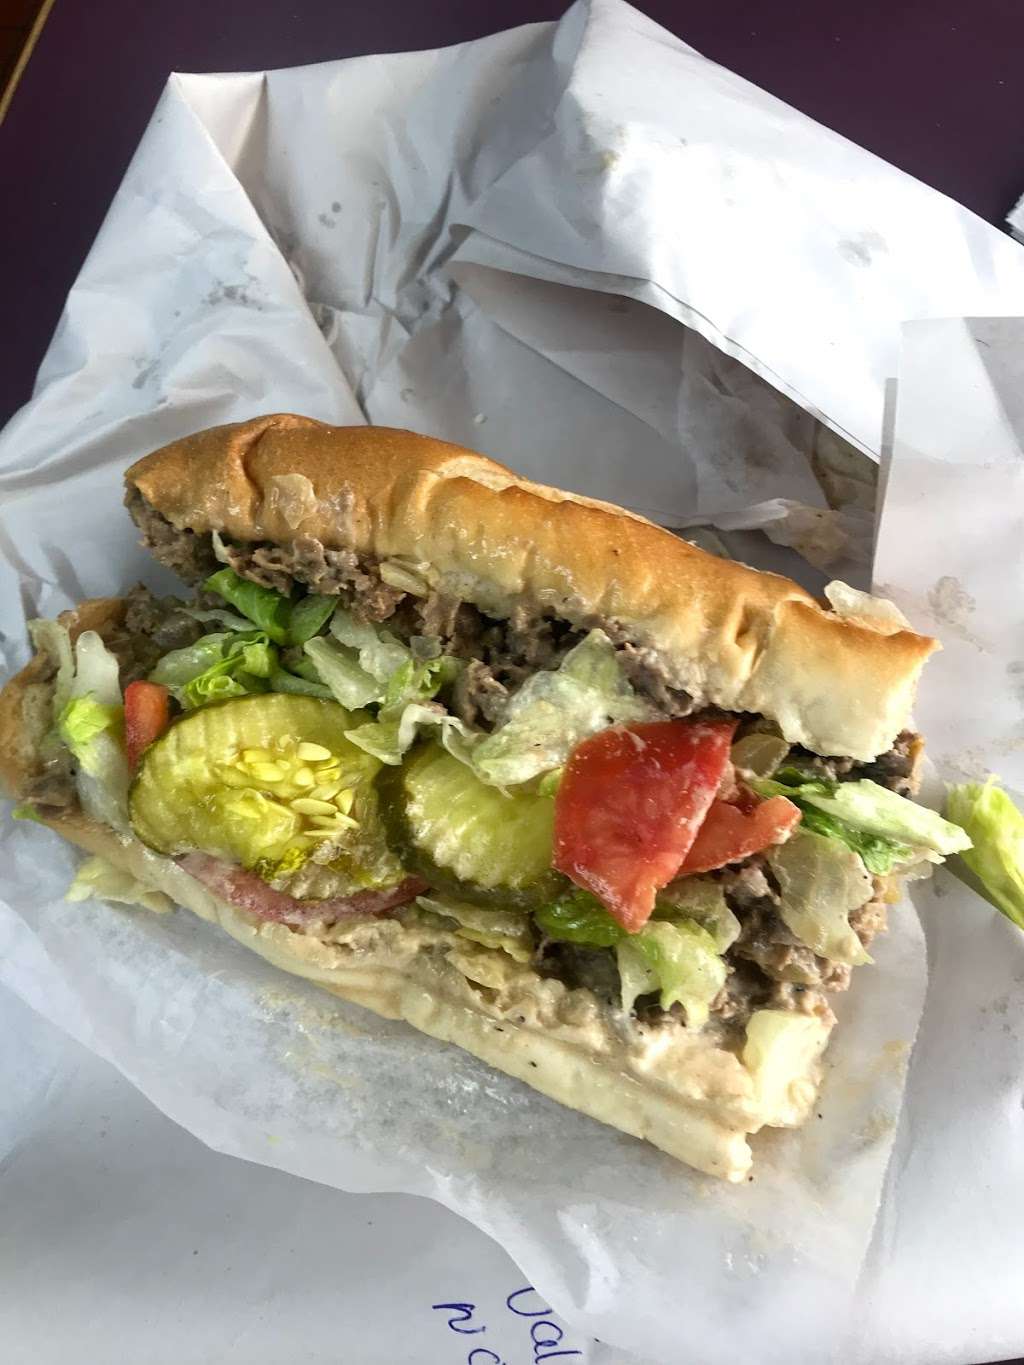 Bellybusters Sub Shoppes | 2139 Baltimore Pike, Oxford, PA 19363 | Phone: (610) 932-5372